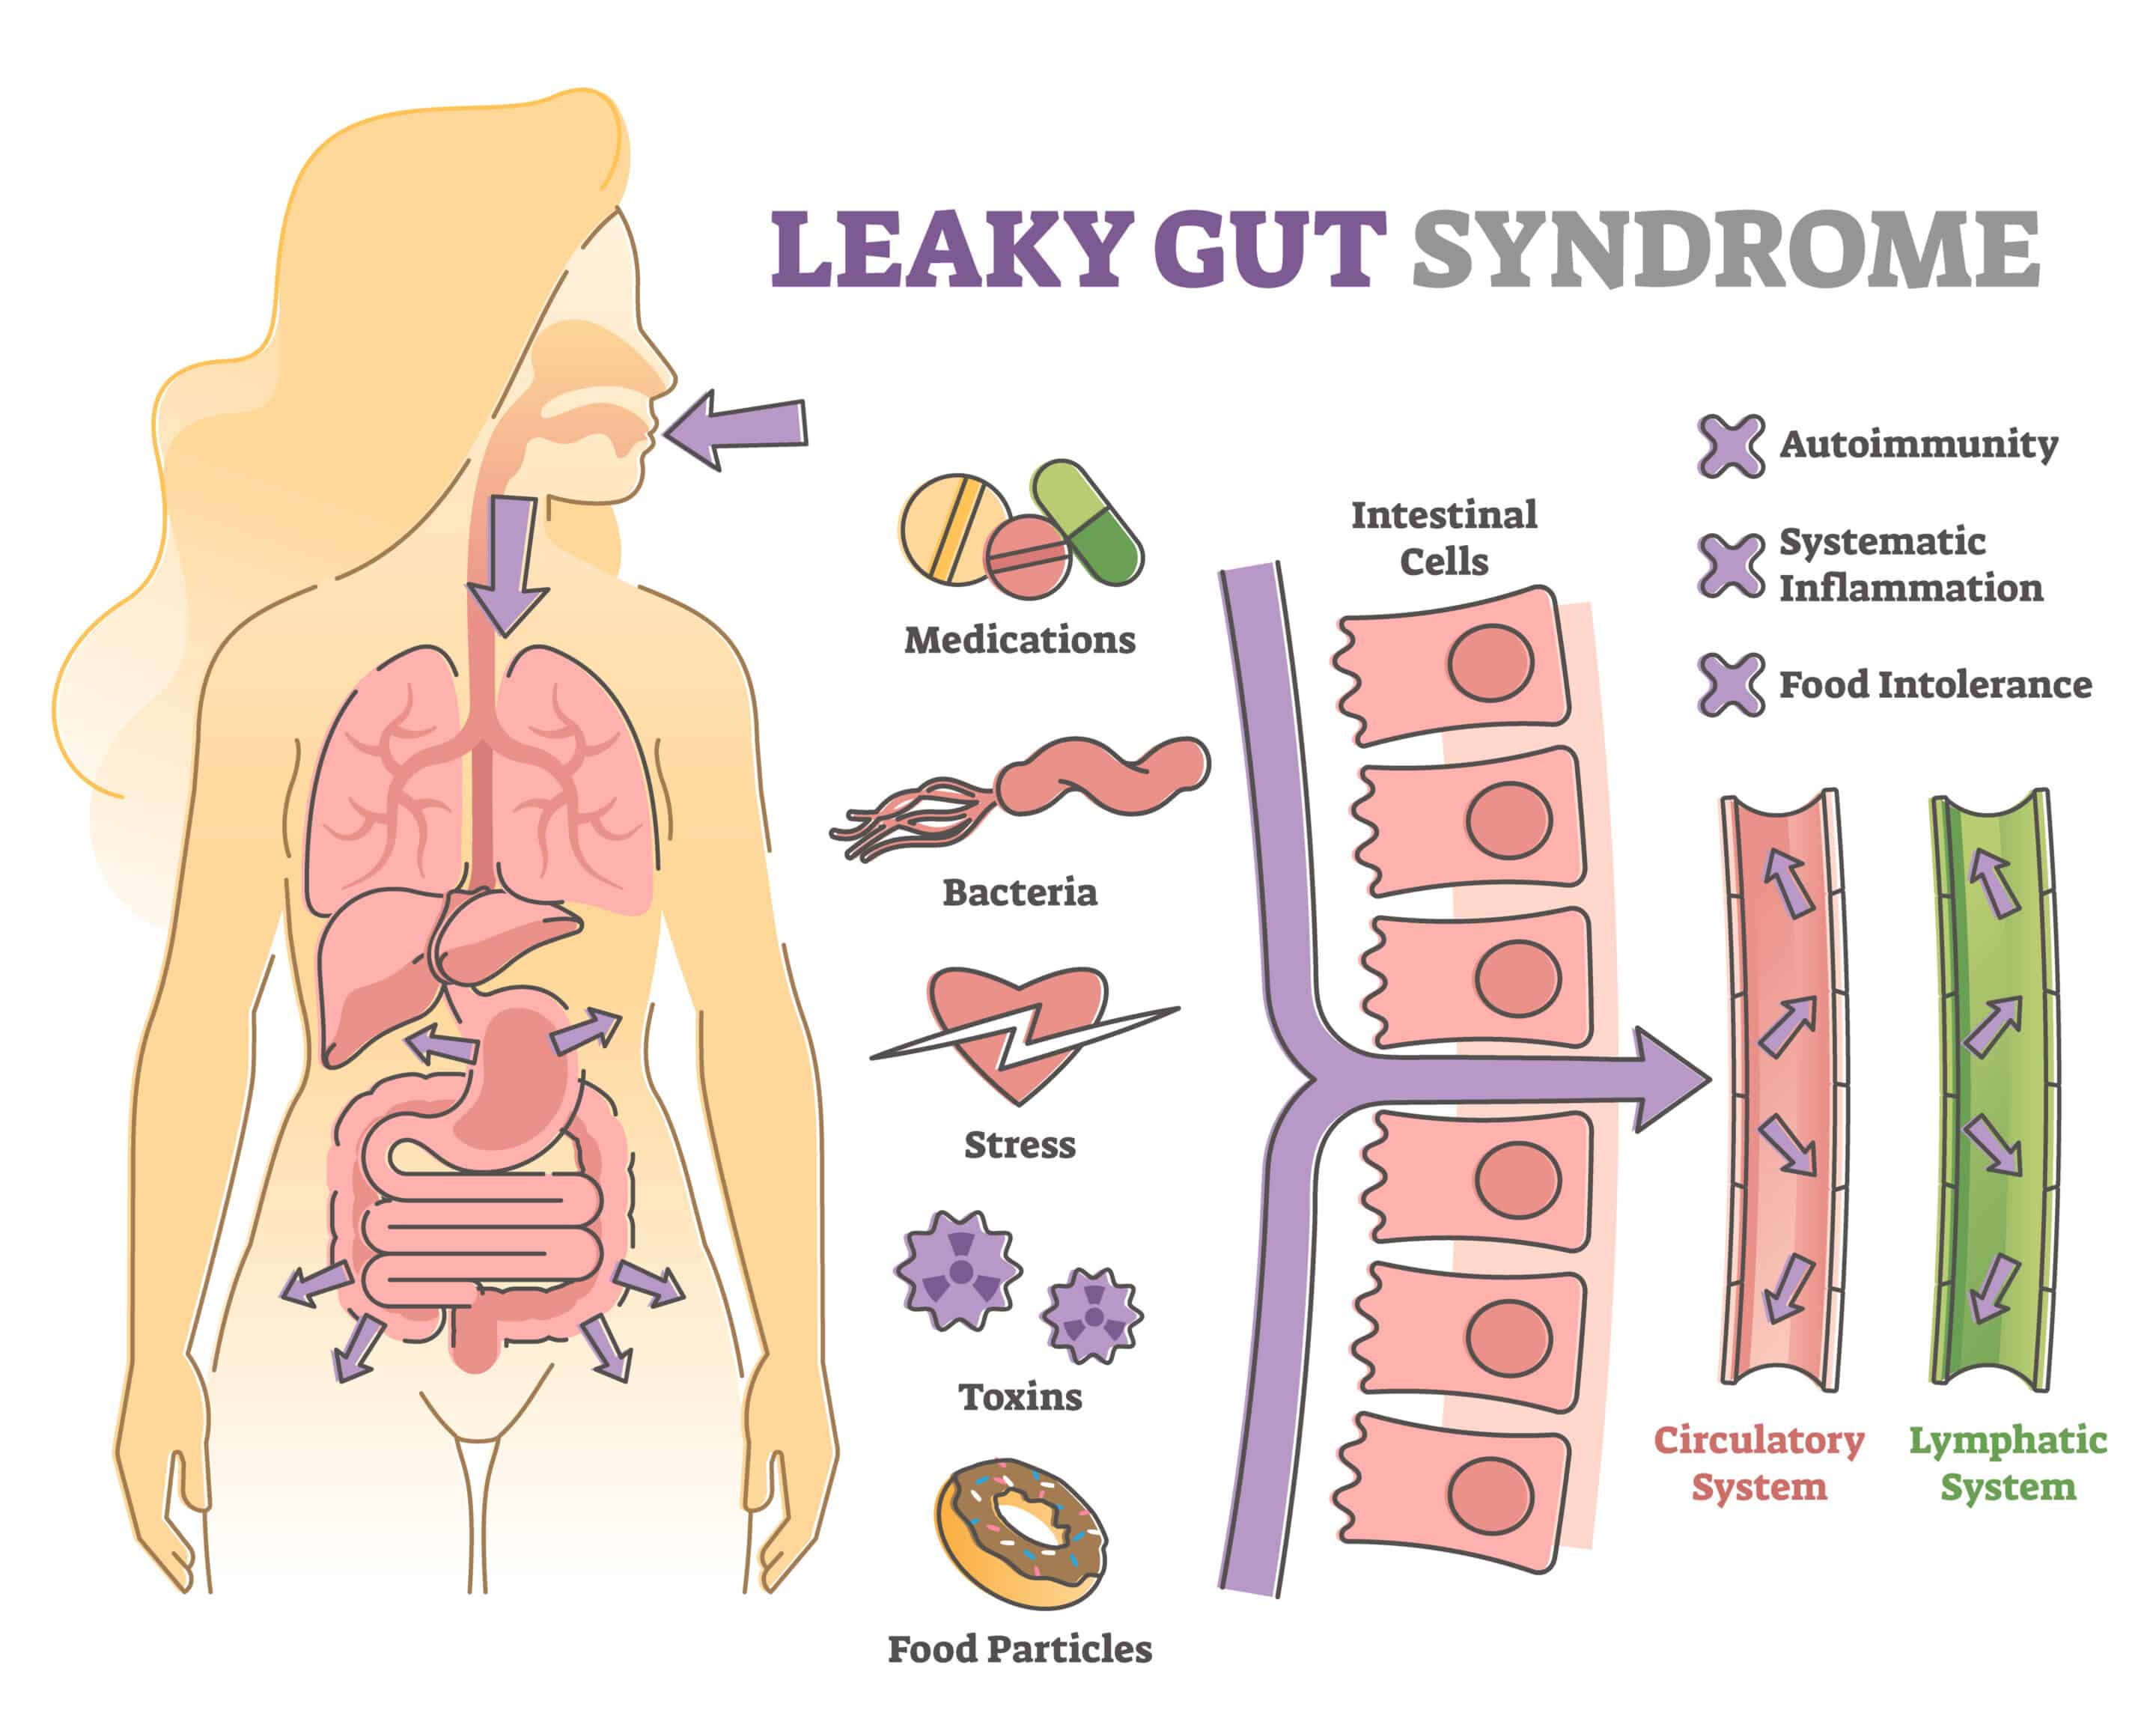 Leaky gut syndrome as immune system reaction to environment outline diagram. Educational labeled scheme with autoimmunity and inflammation causes from gastrointestinal problems vector illustration.